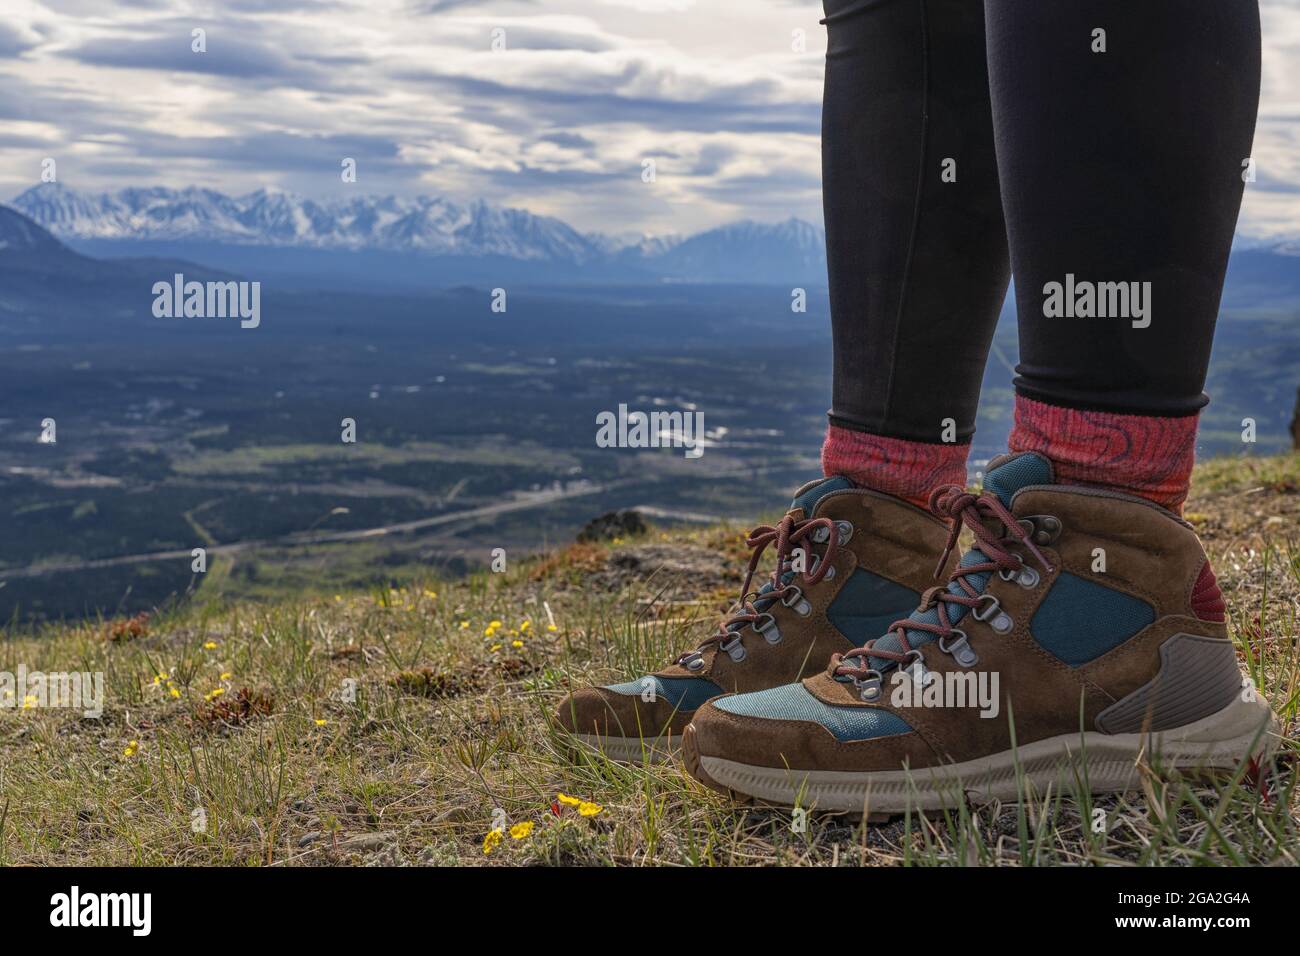 Close-up of woman's feet wearing hiking boots, standing on a mountaintop with a vista of the mountain ranges and valley below in the distance on a ... Stock Photo